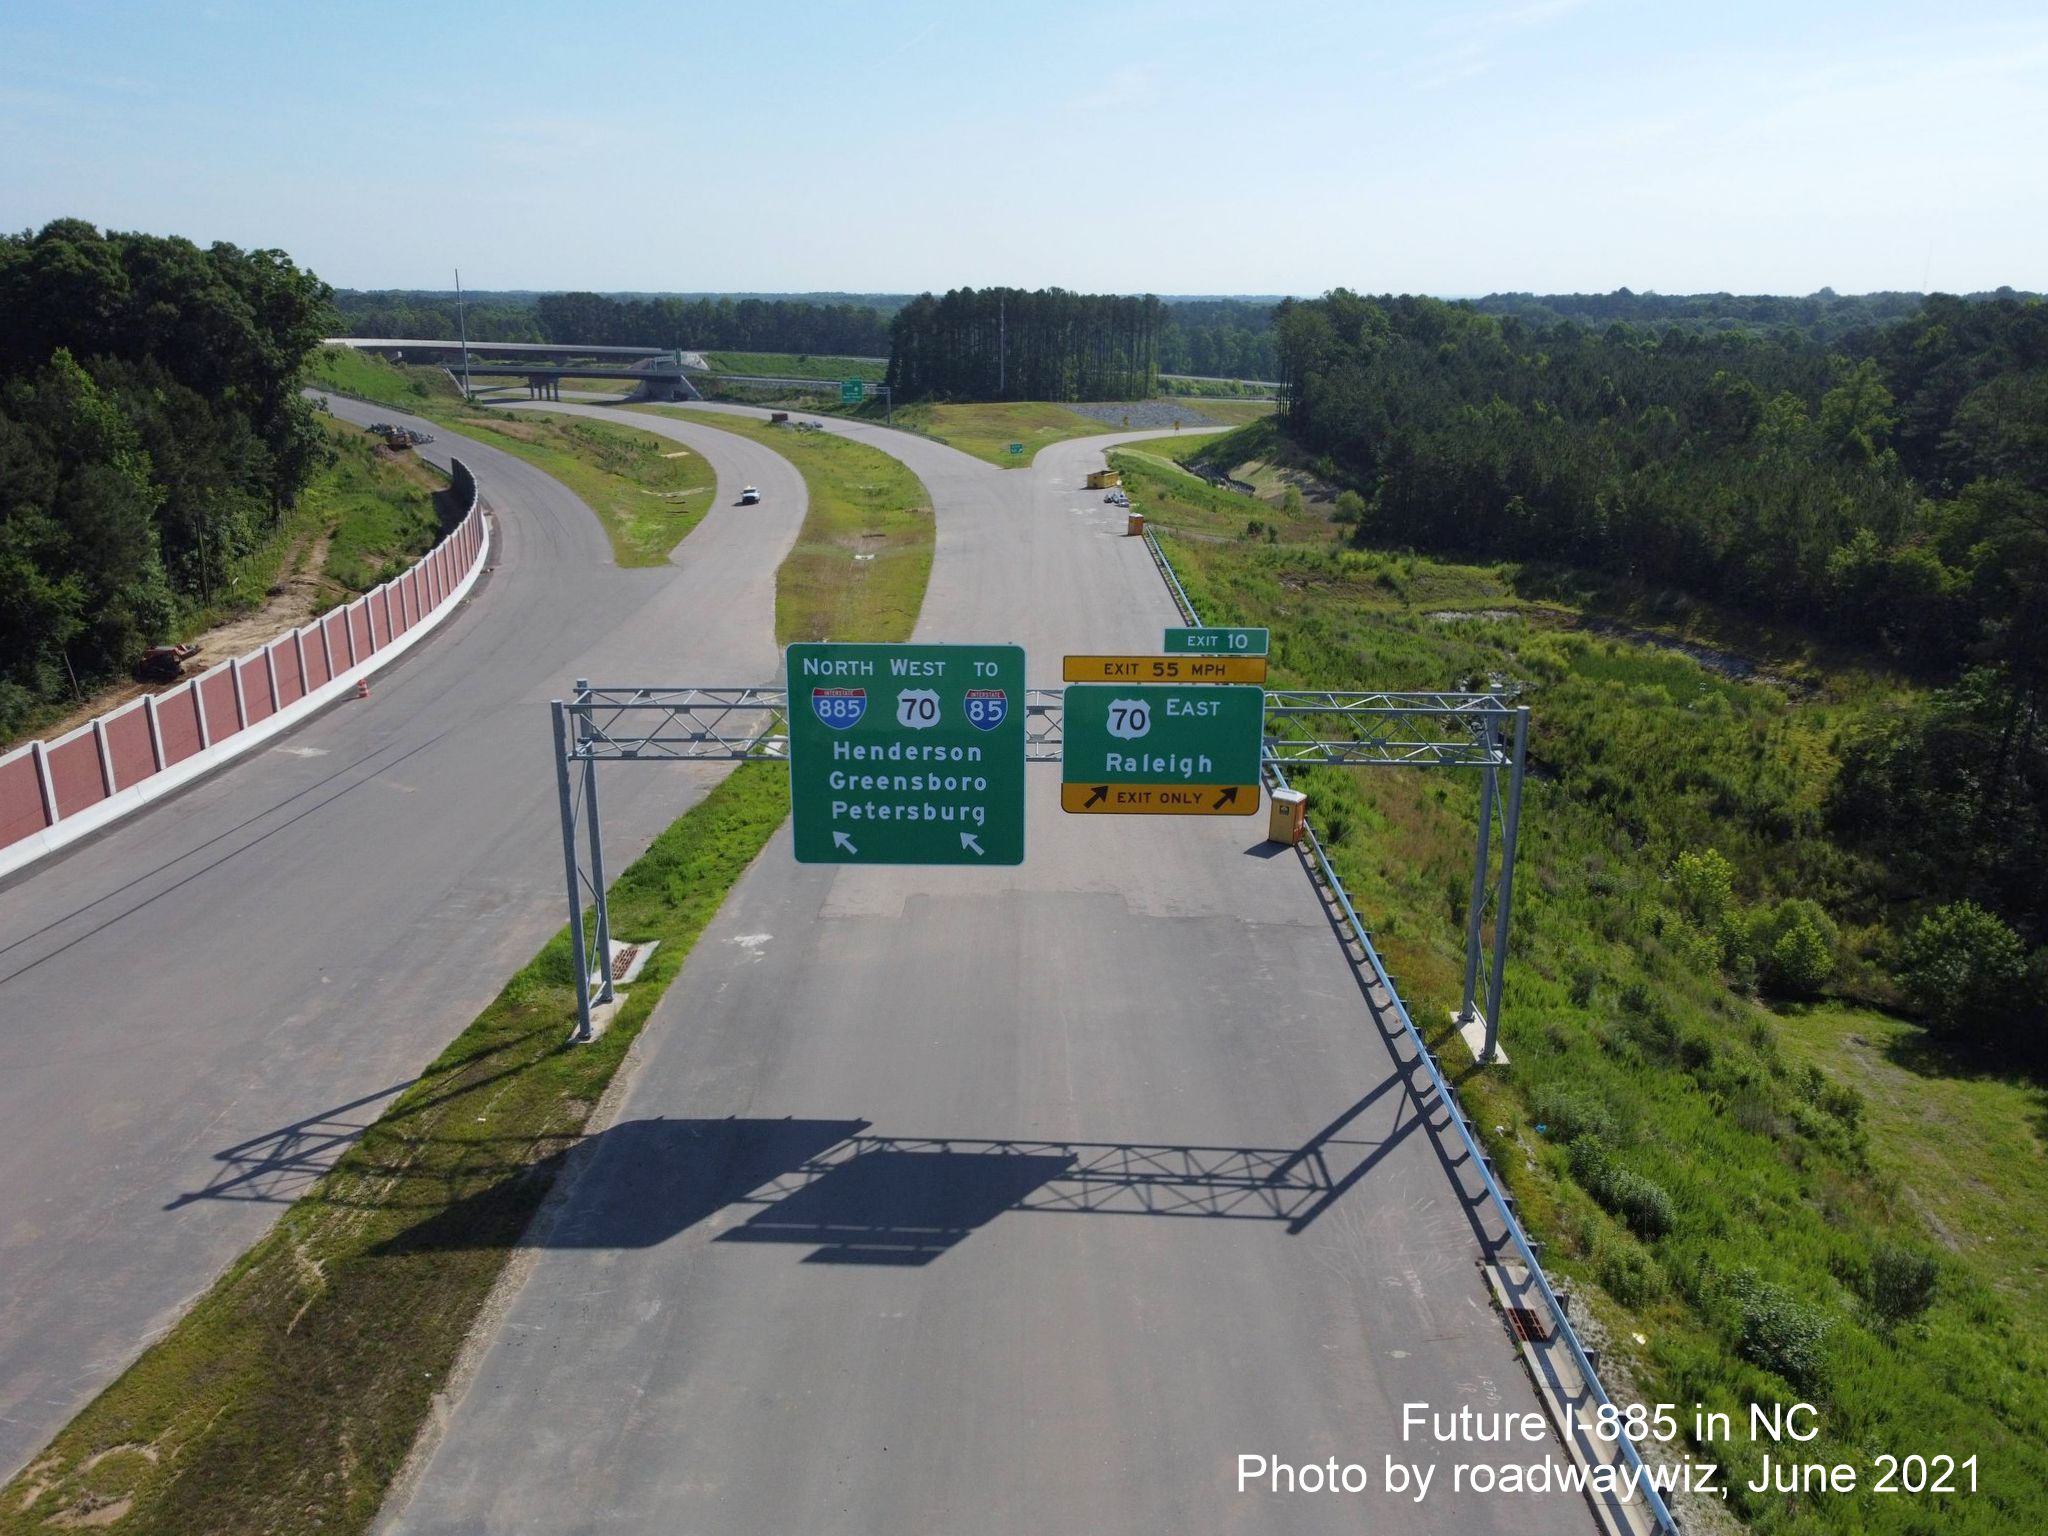 Image of overhead ramp and pull through signs on unopened I-885 North for US 70 exit in Durham, photo by roadwaywiz, June 2021